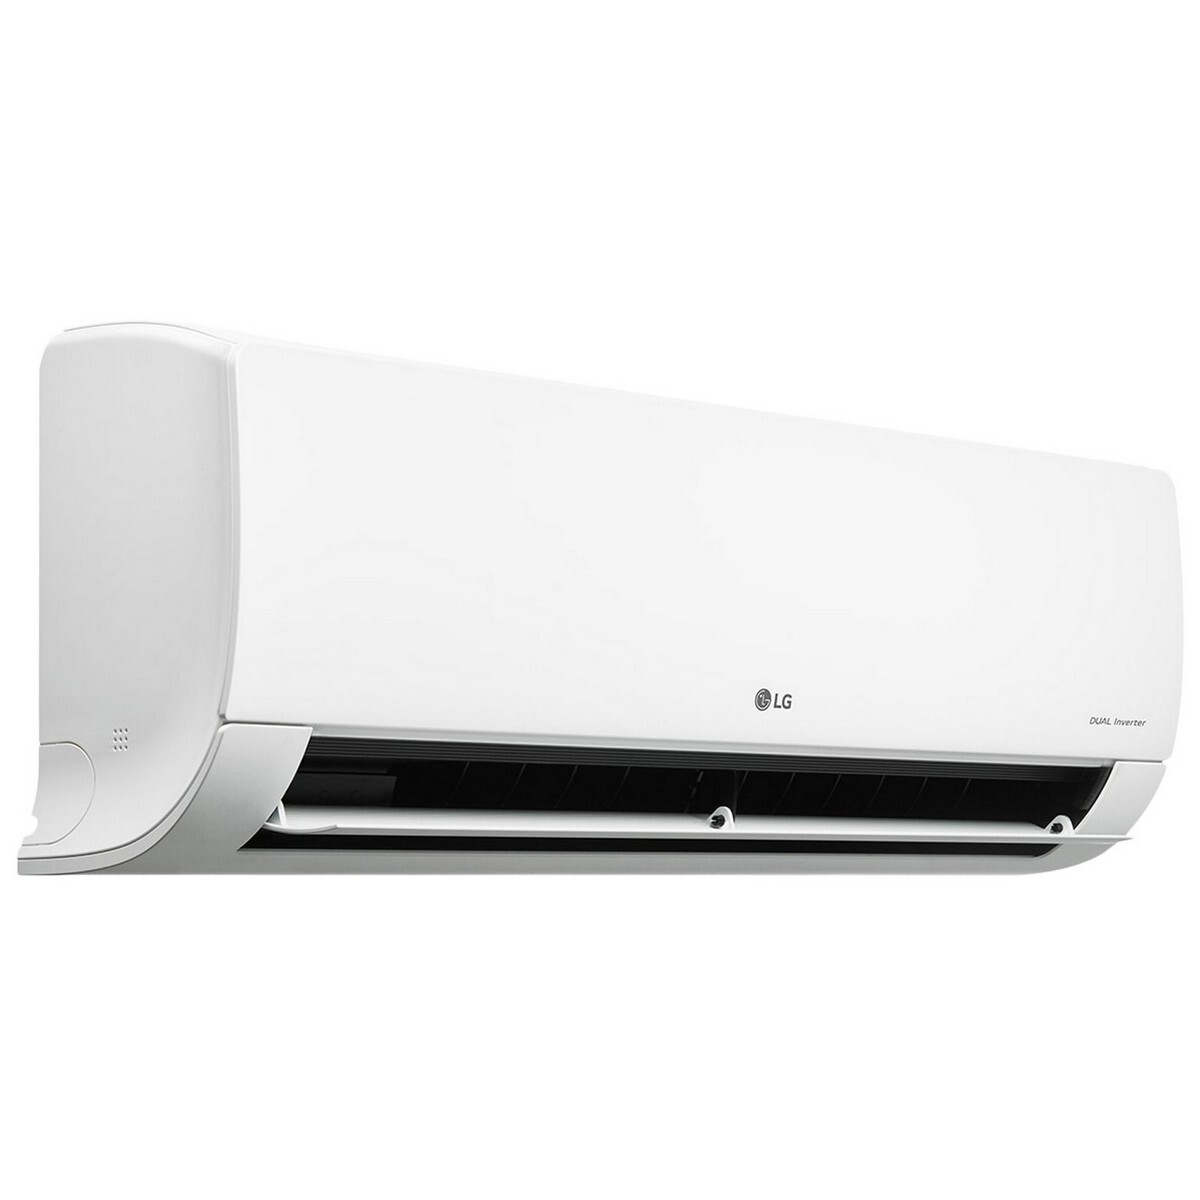 LG 6 in 1 Convertible Air Conditioner Inverter RS-Q14ENZE 1 Ton 5 Star